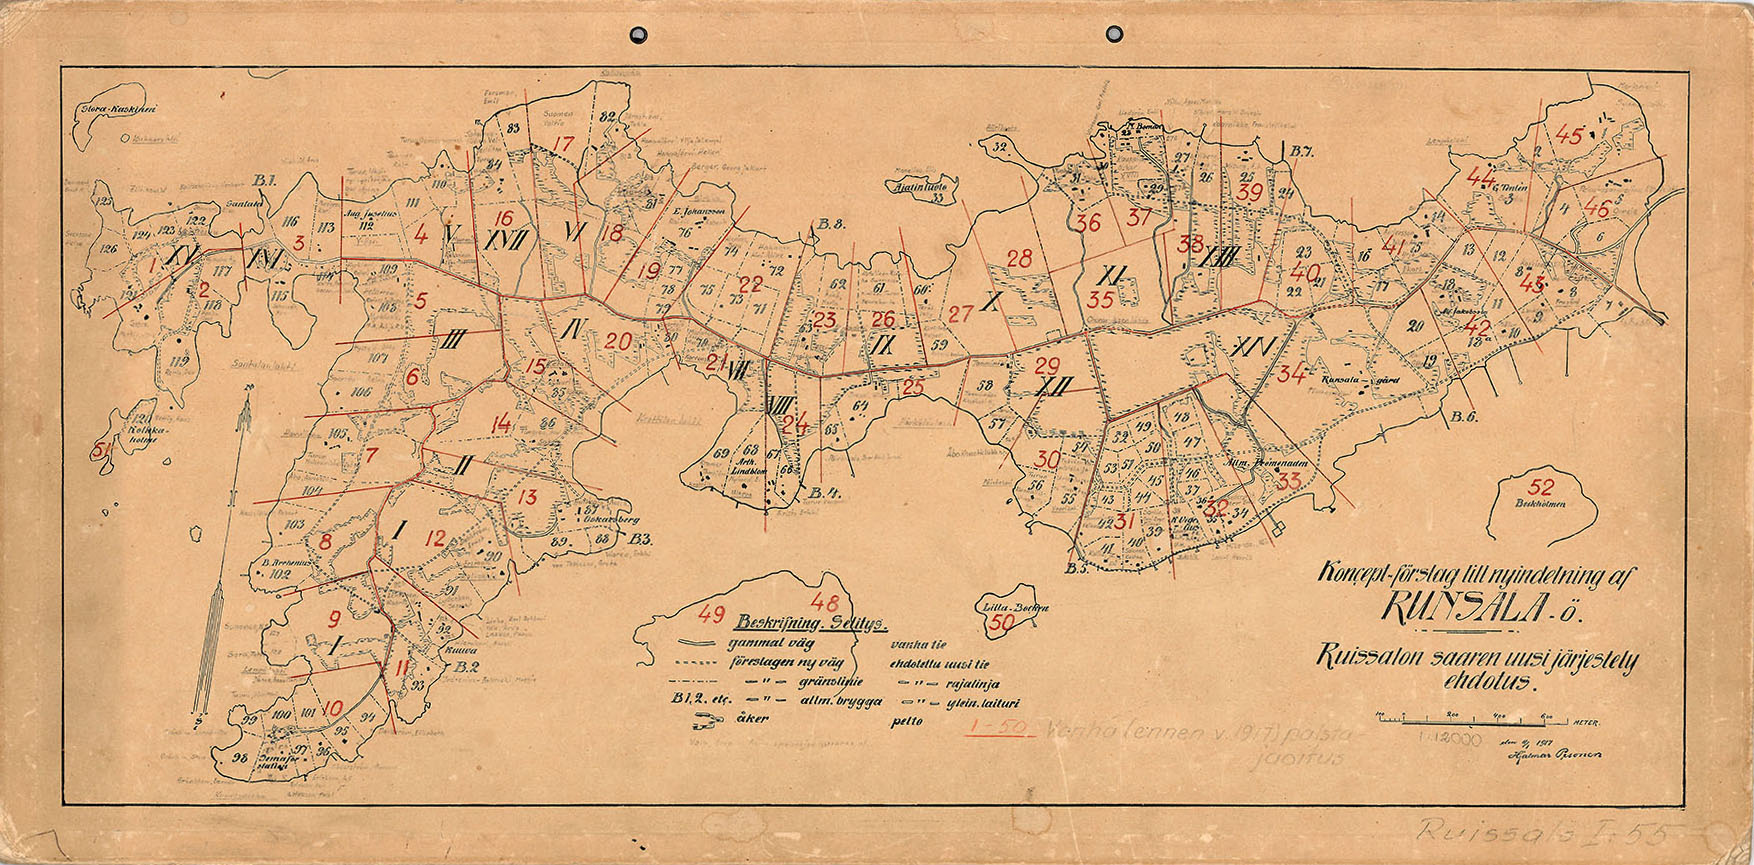 The new plot division of the island of Ruissalo (1917) / Photo: Turku Museum Centre